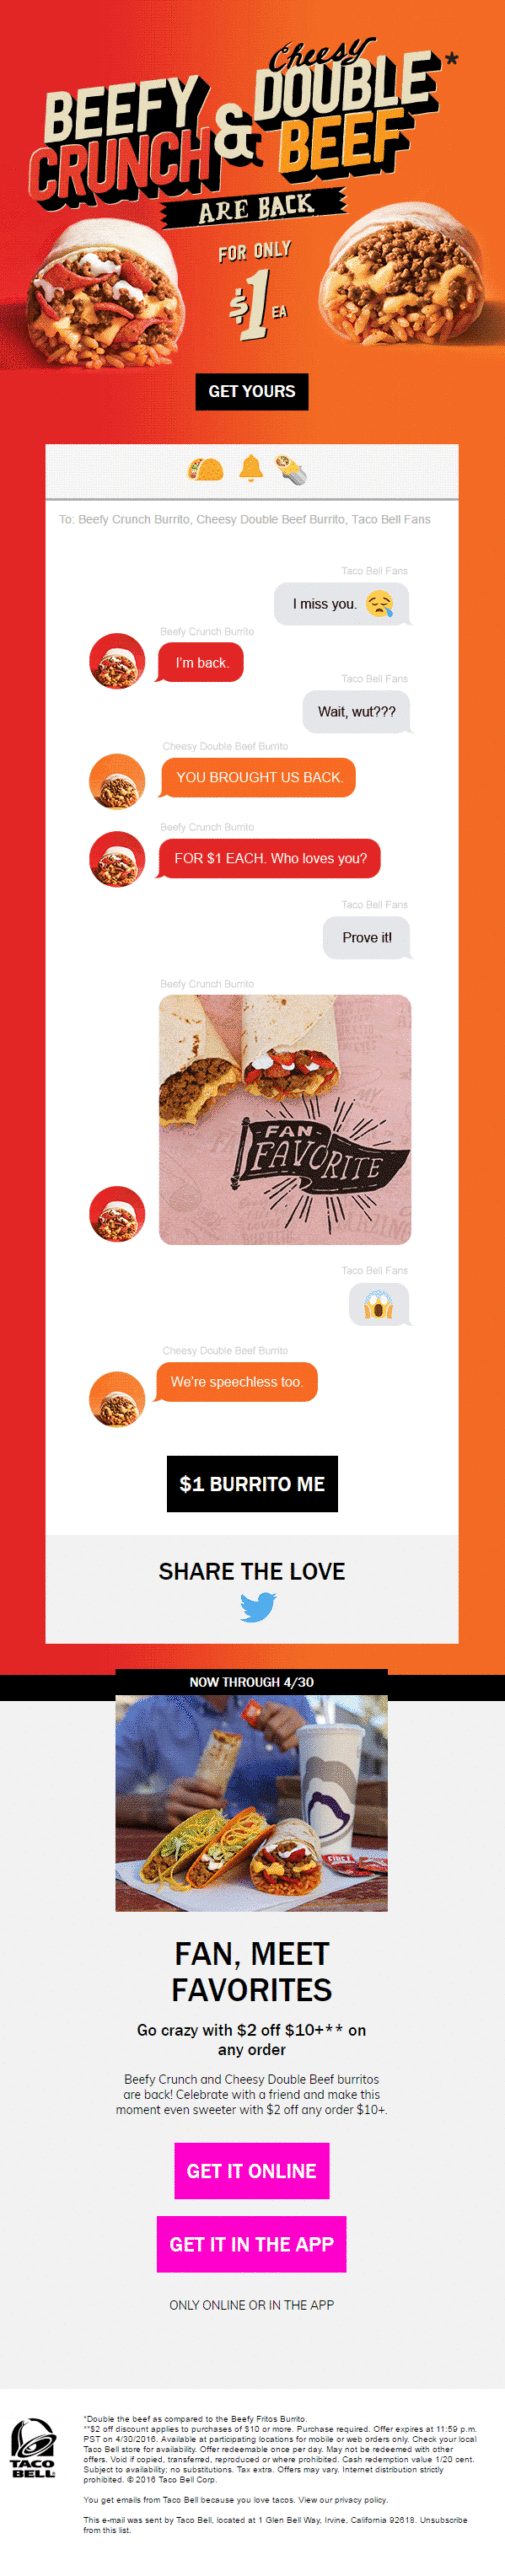 Taco Bell email marketing